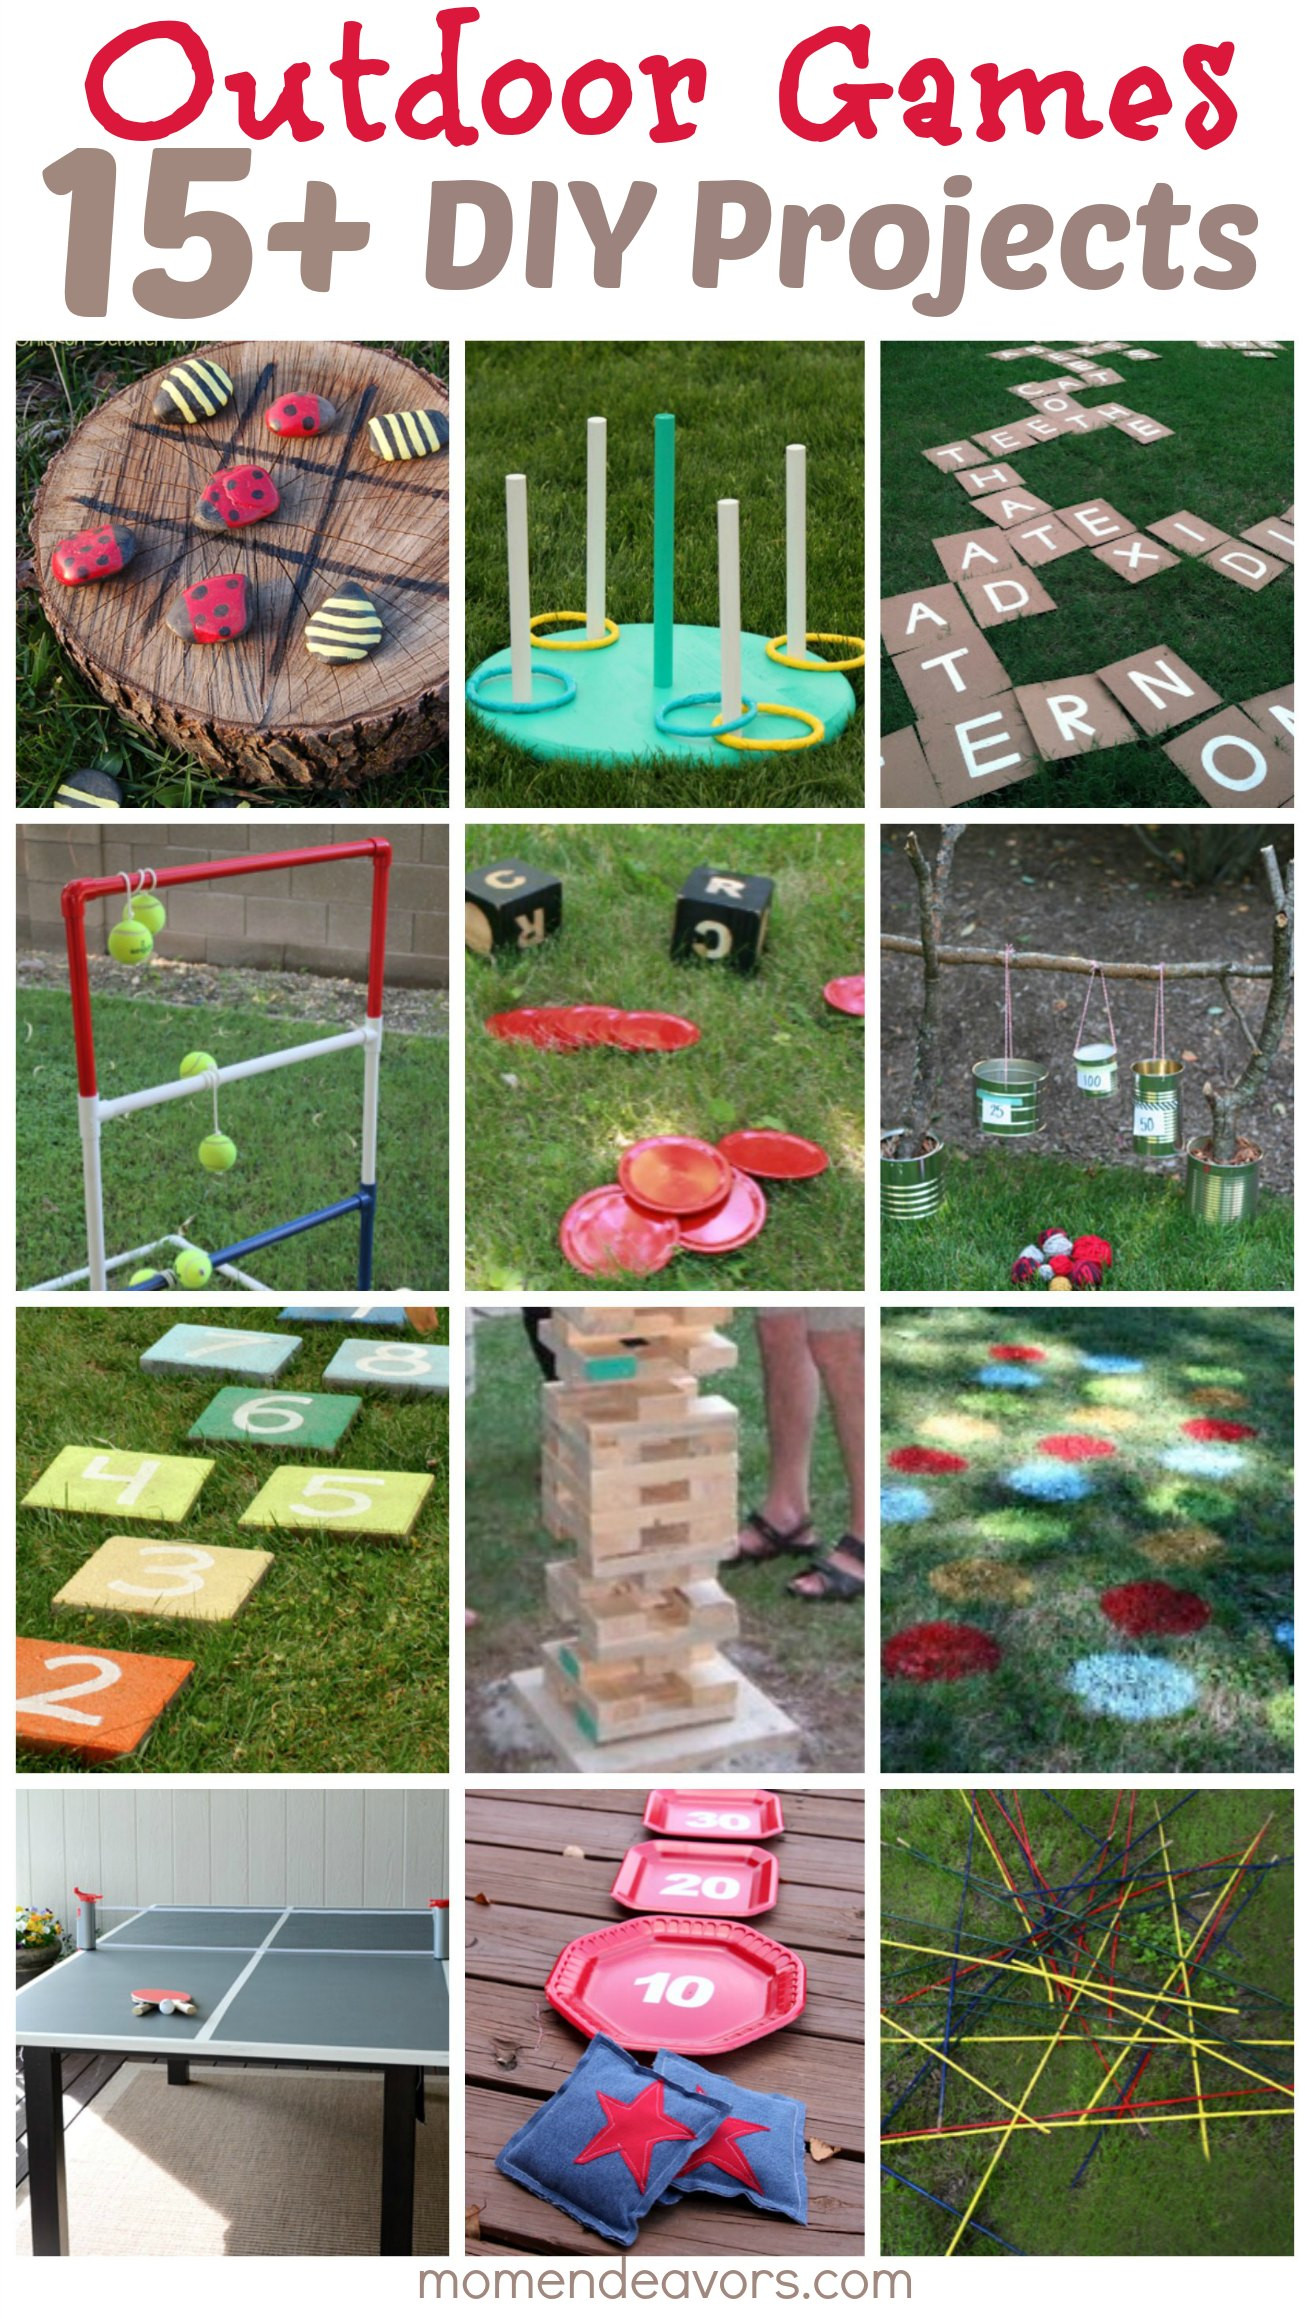 DIY Games For Kids
 DIY Outdoor Games – 15 Awesome Project Ideas for Backyard